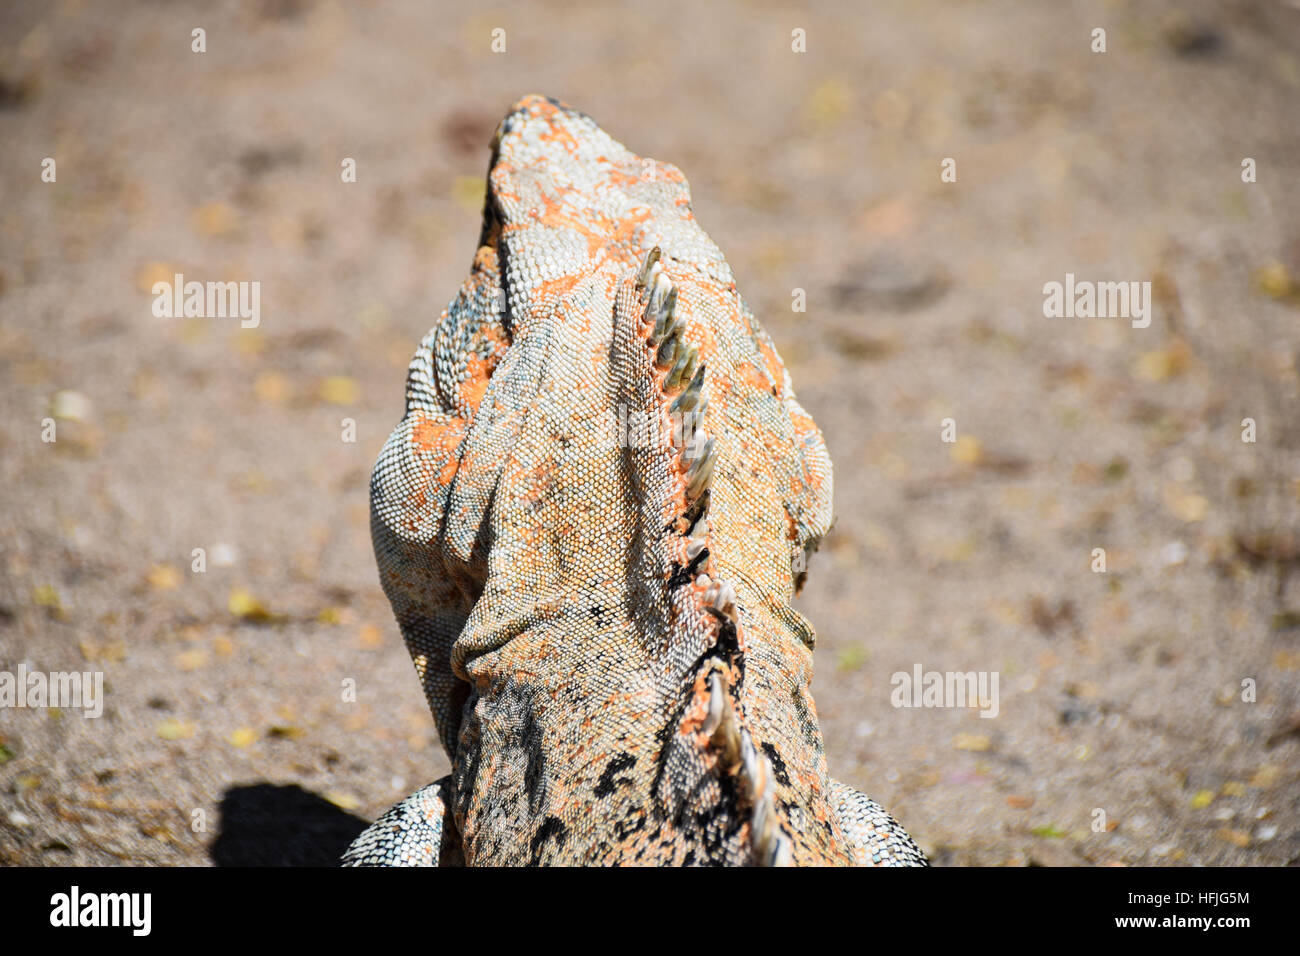 Rear view of iguana warming up on the sand Costa Rica's Guanacaste beaches Stock Photo